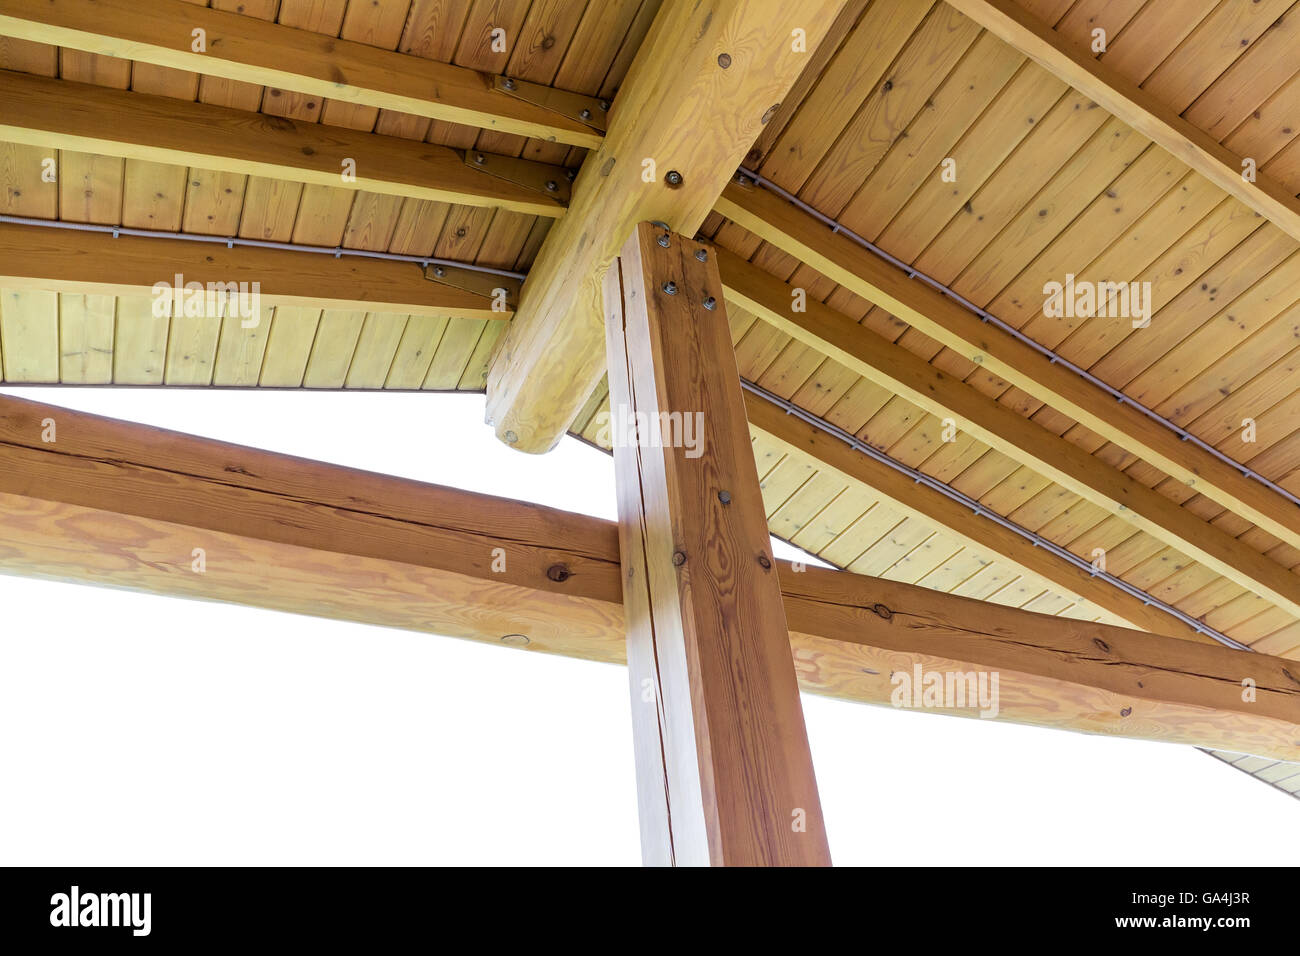 Interior view of a wooden roof structure, rafters and trusses Stock Photo